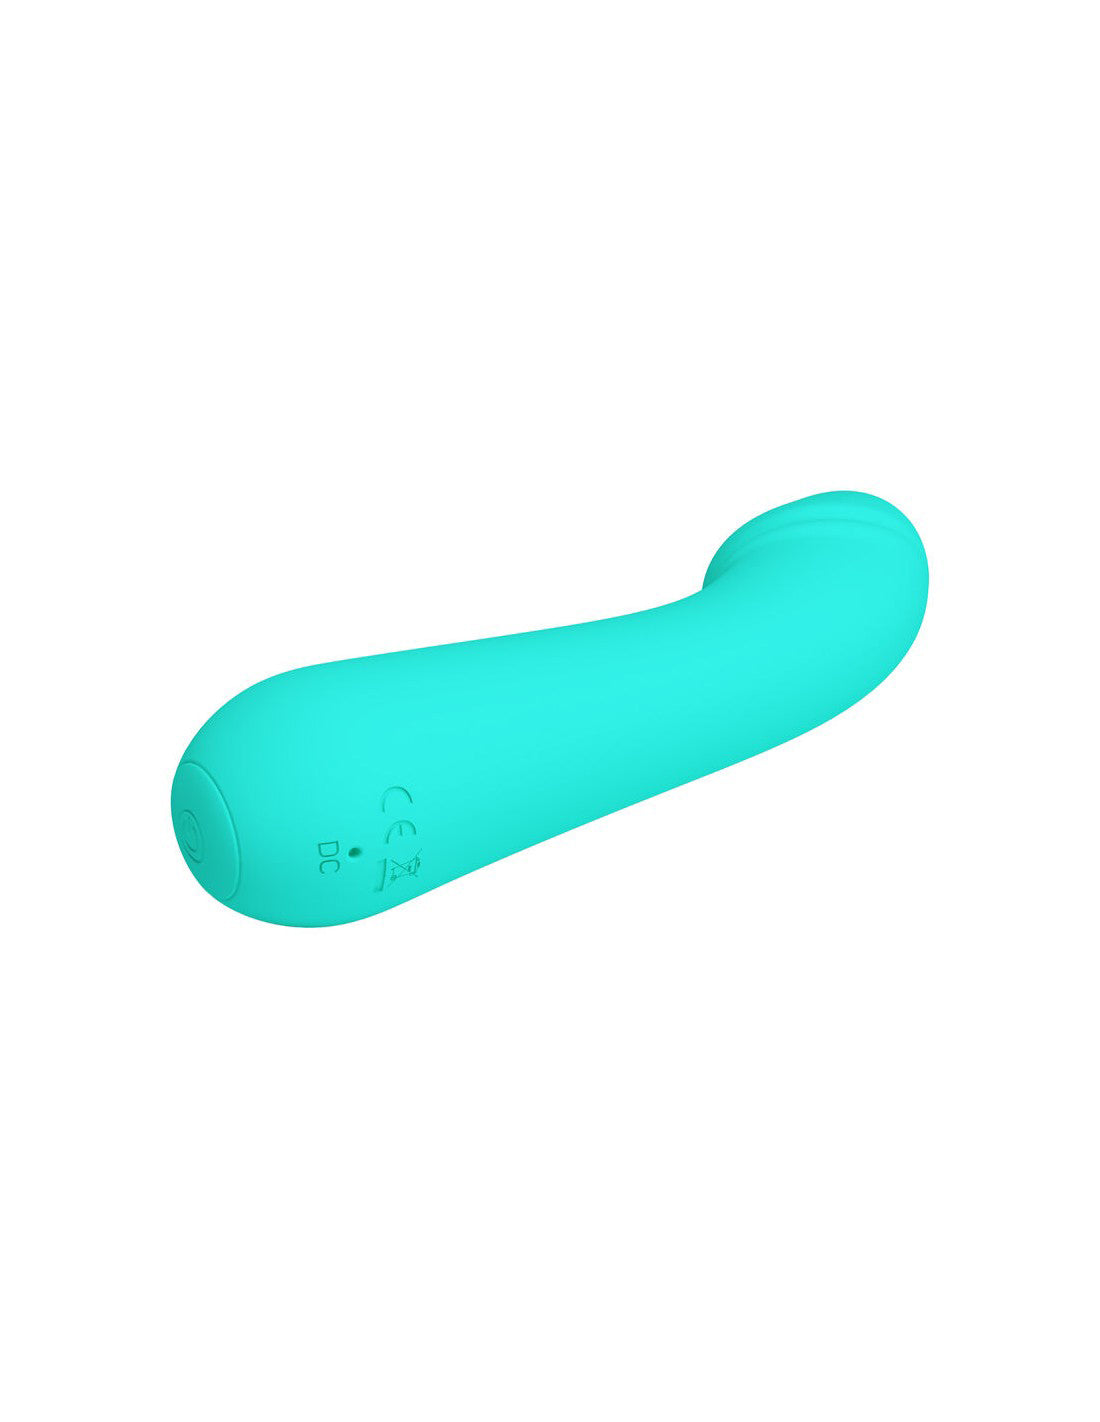 Cetus Rechargeable Vibrator - Turquoise